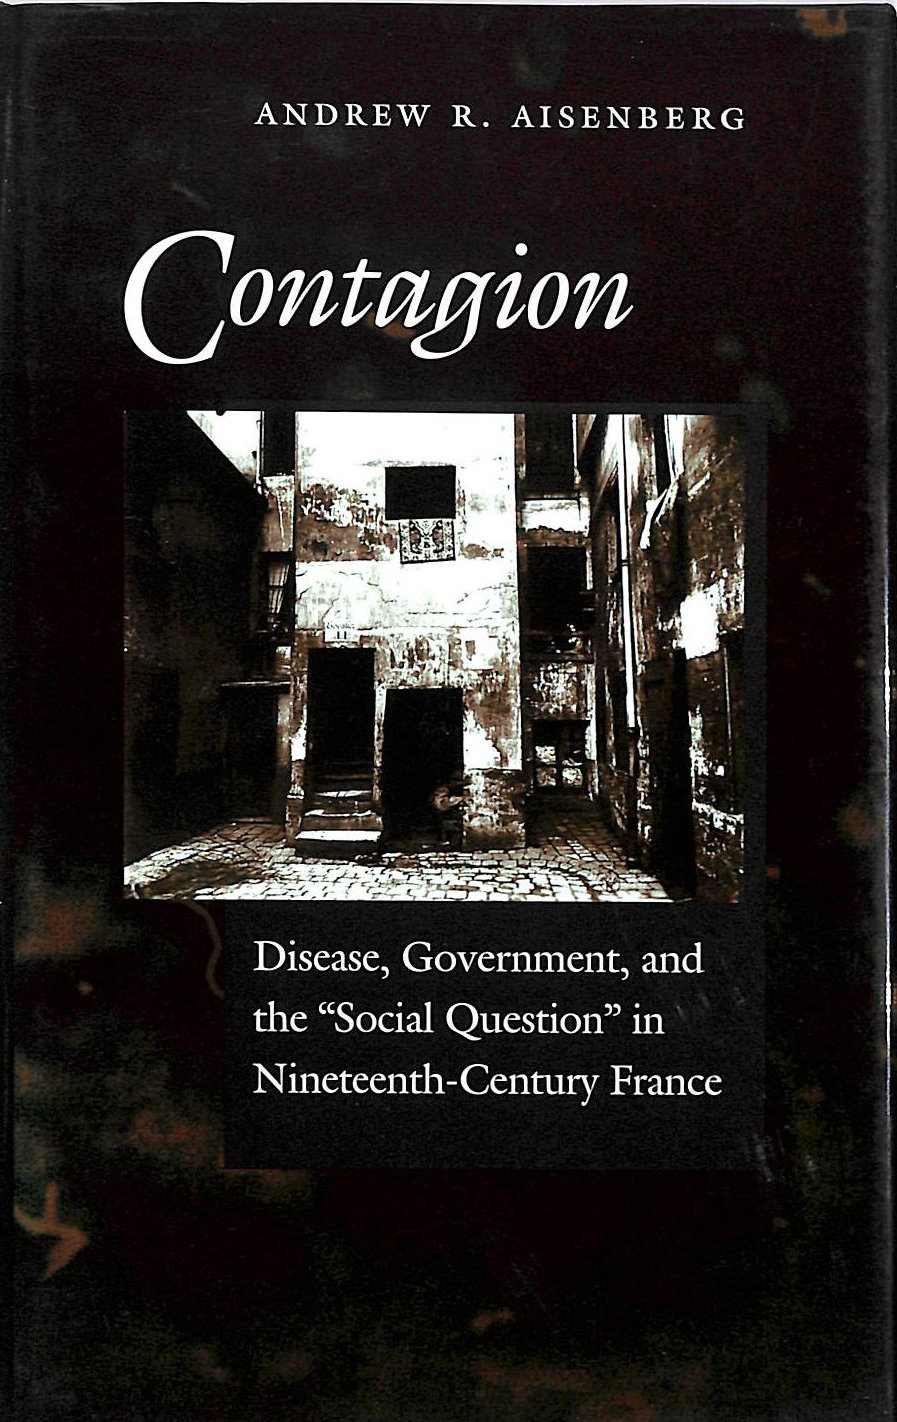 AISENBERG, ANDREW R. - Contagion: Disease, Government and the Social Question in Nineteenth-century France